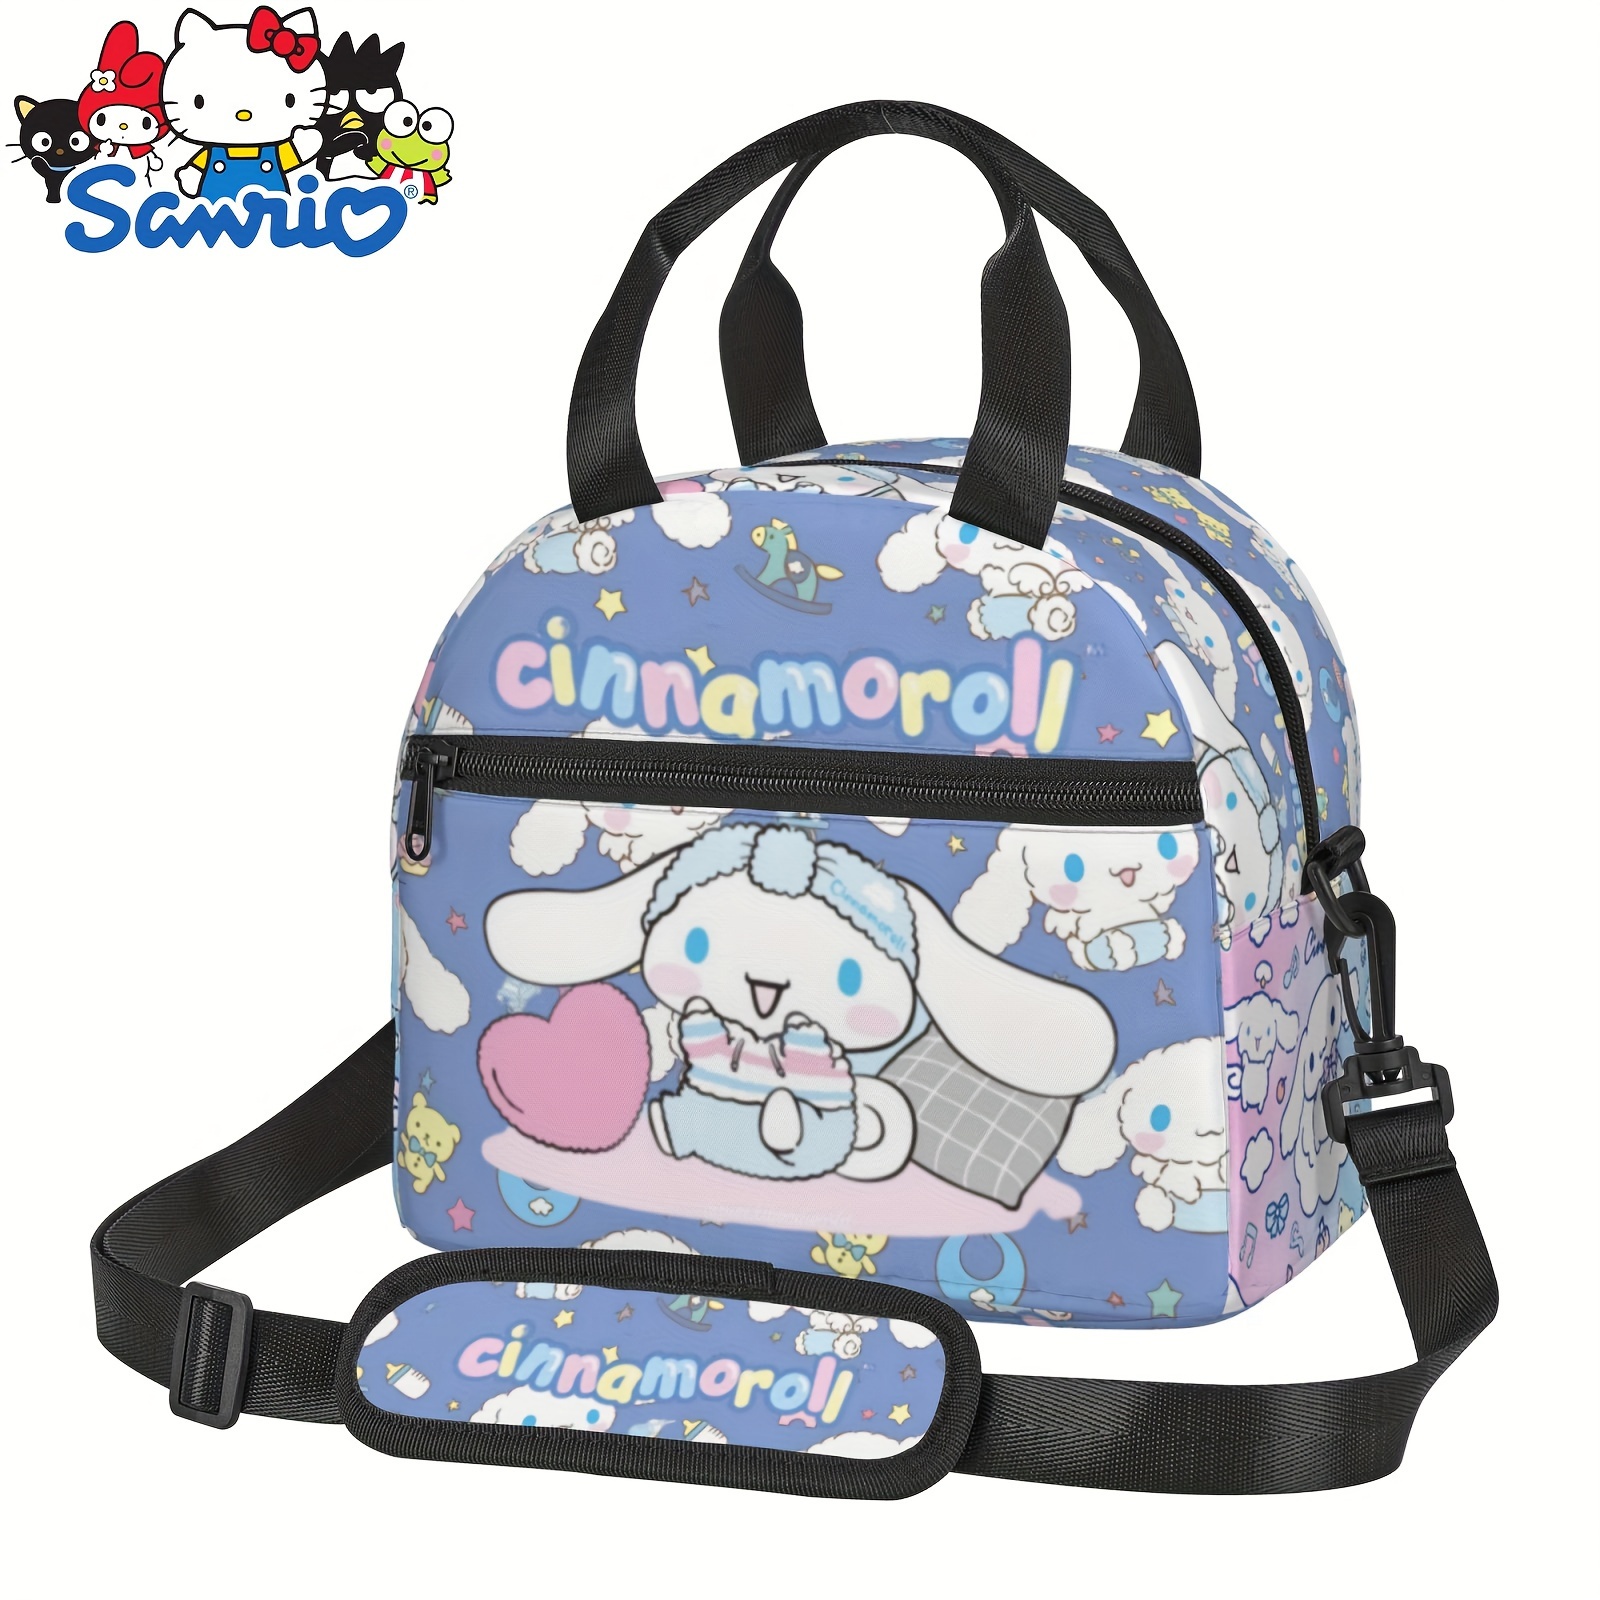 

1pc Authorized By Sanrio Cute Cinnamoroll Portable Lunch Bag Kawaii Reusable Insulated Lunch Box Cooler Bag Lunch Tote With Adjustable Shoulder Belt For Men Women Office Work Picnic Travel Gifts